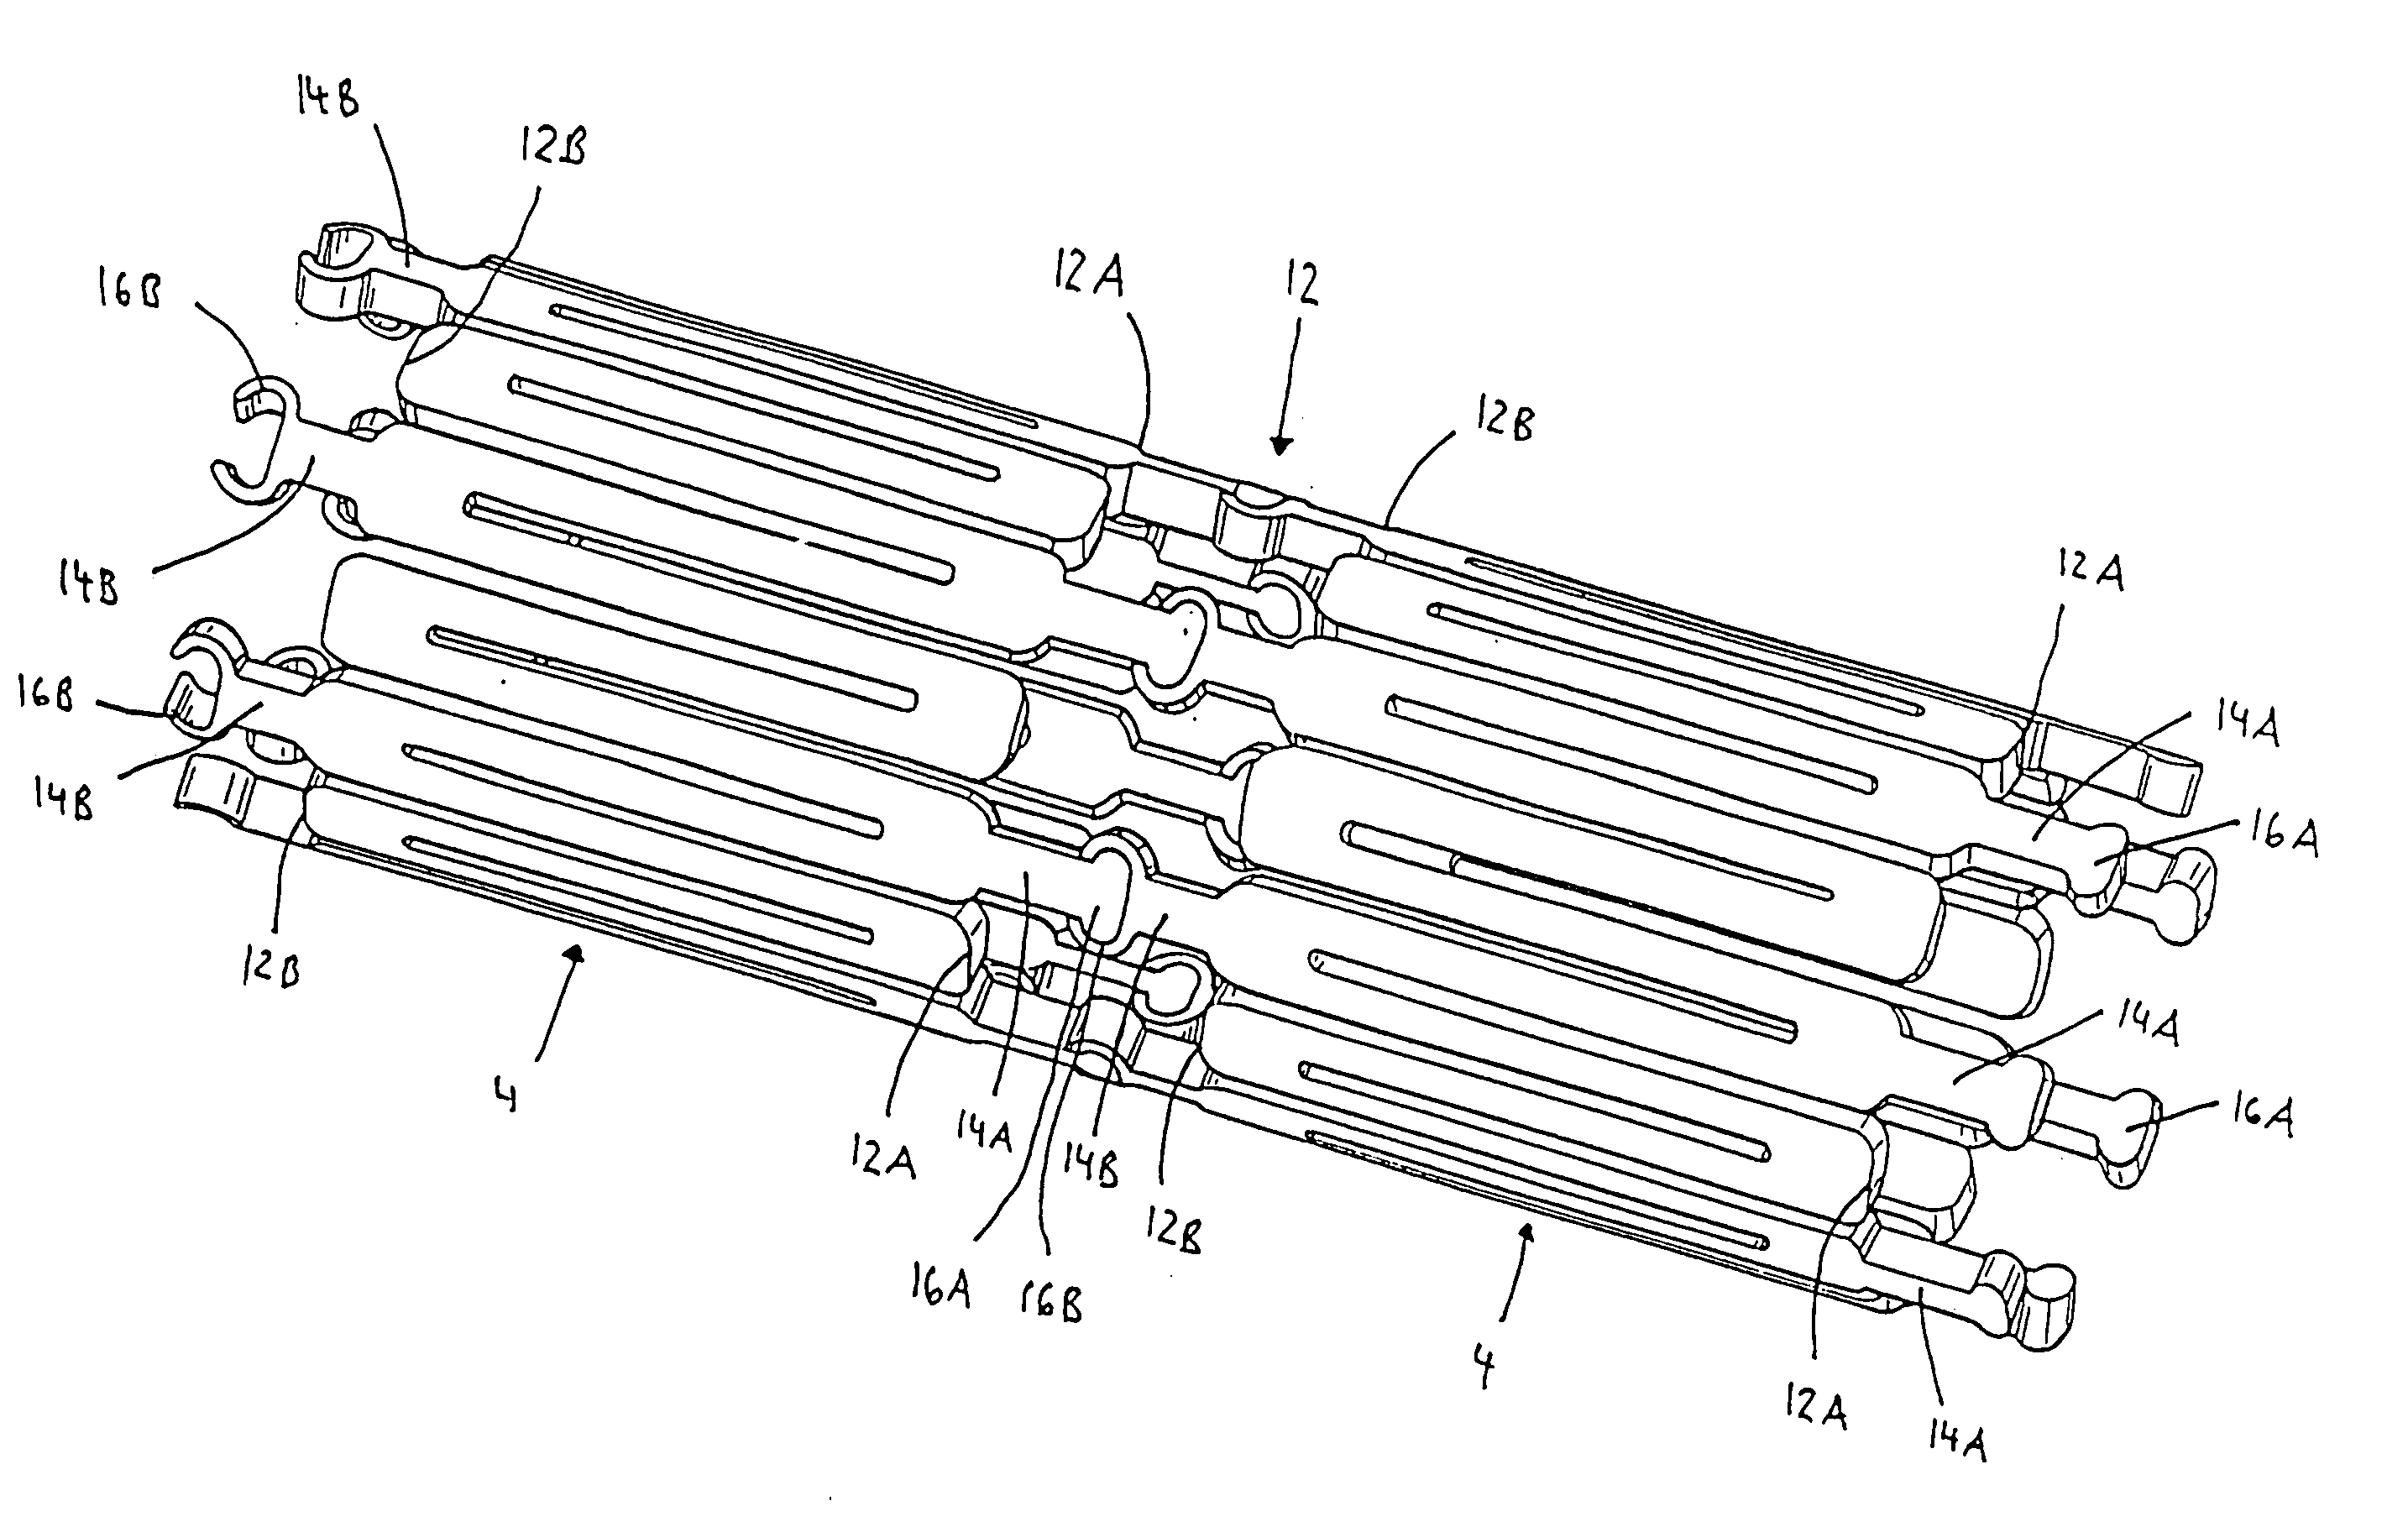 Metal structure compatible with mri imaging, and method of manufacturing such a structure